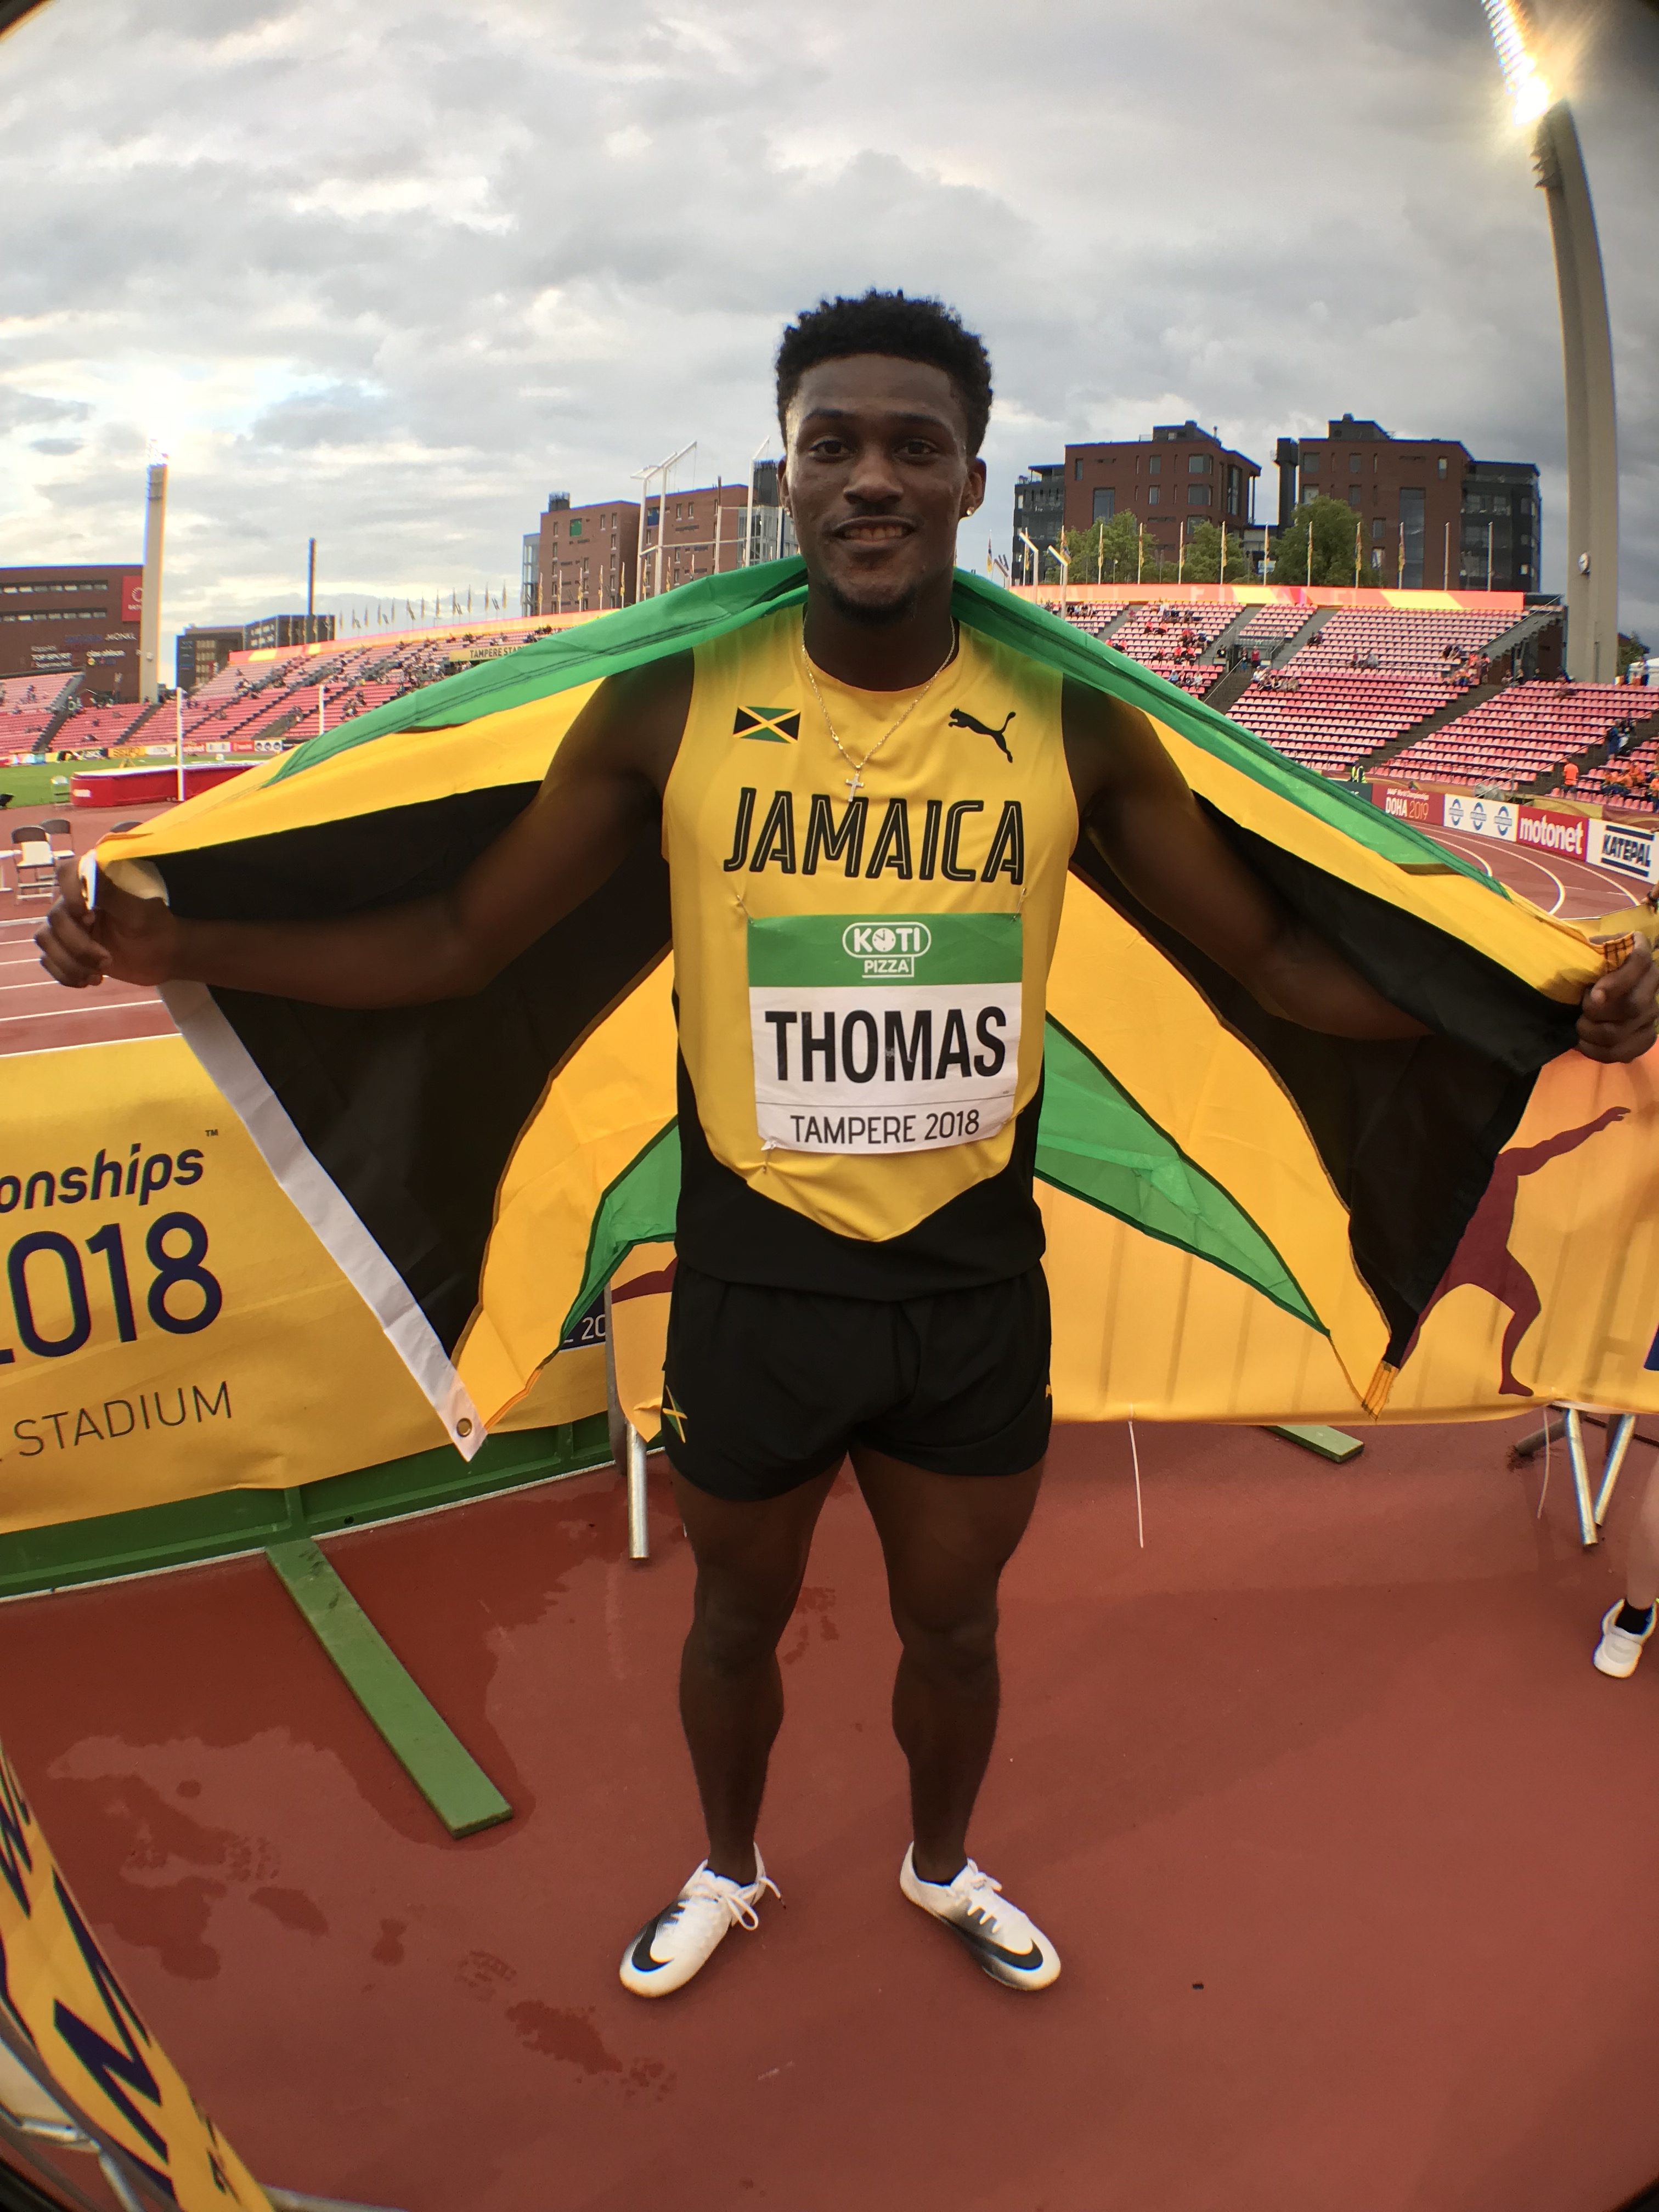 Jamaica student-athletes in USA and CANADA 2020